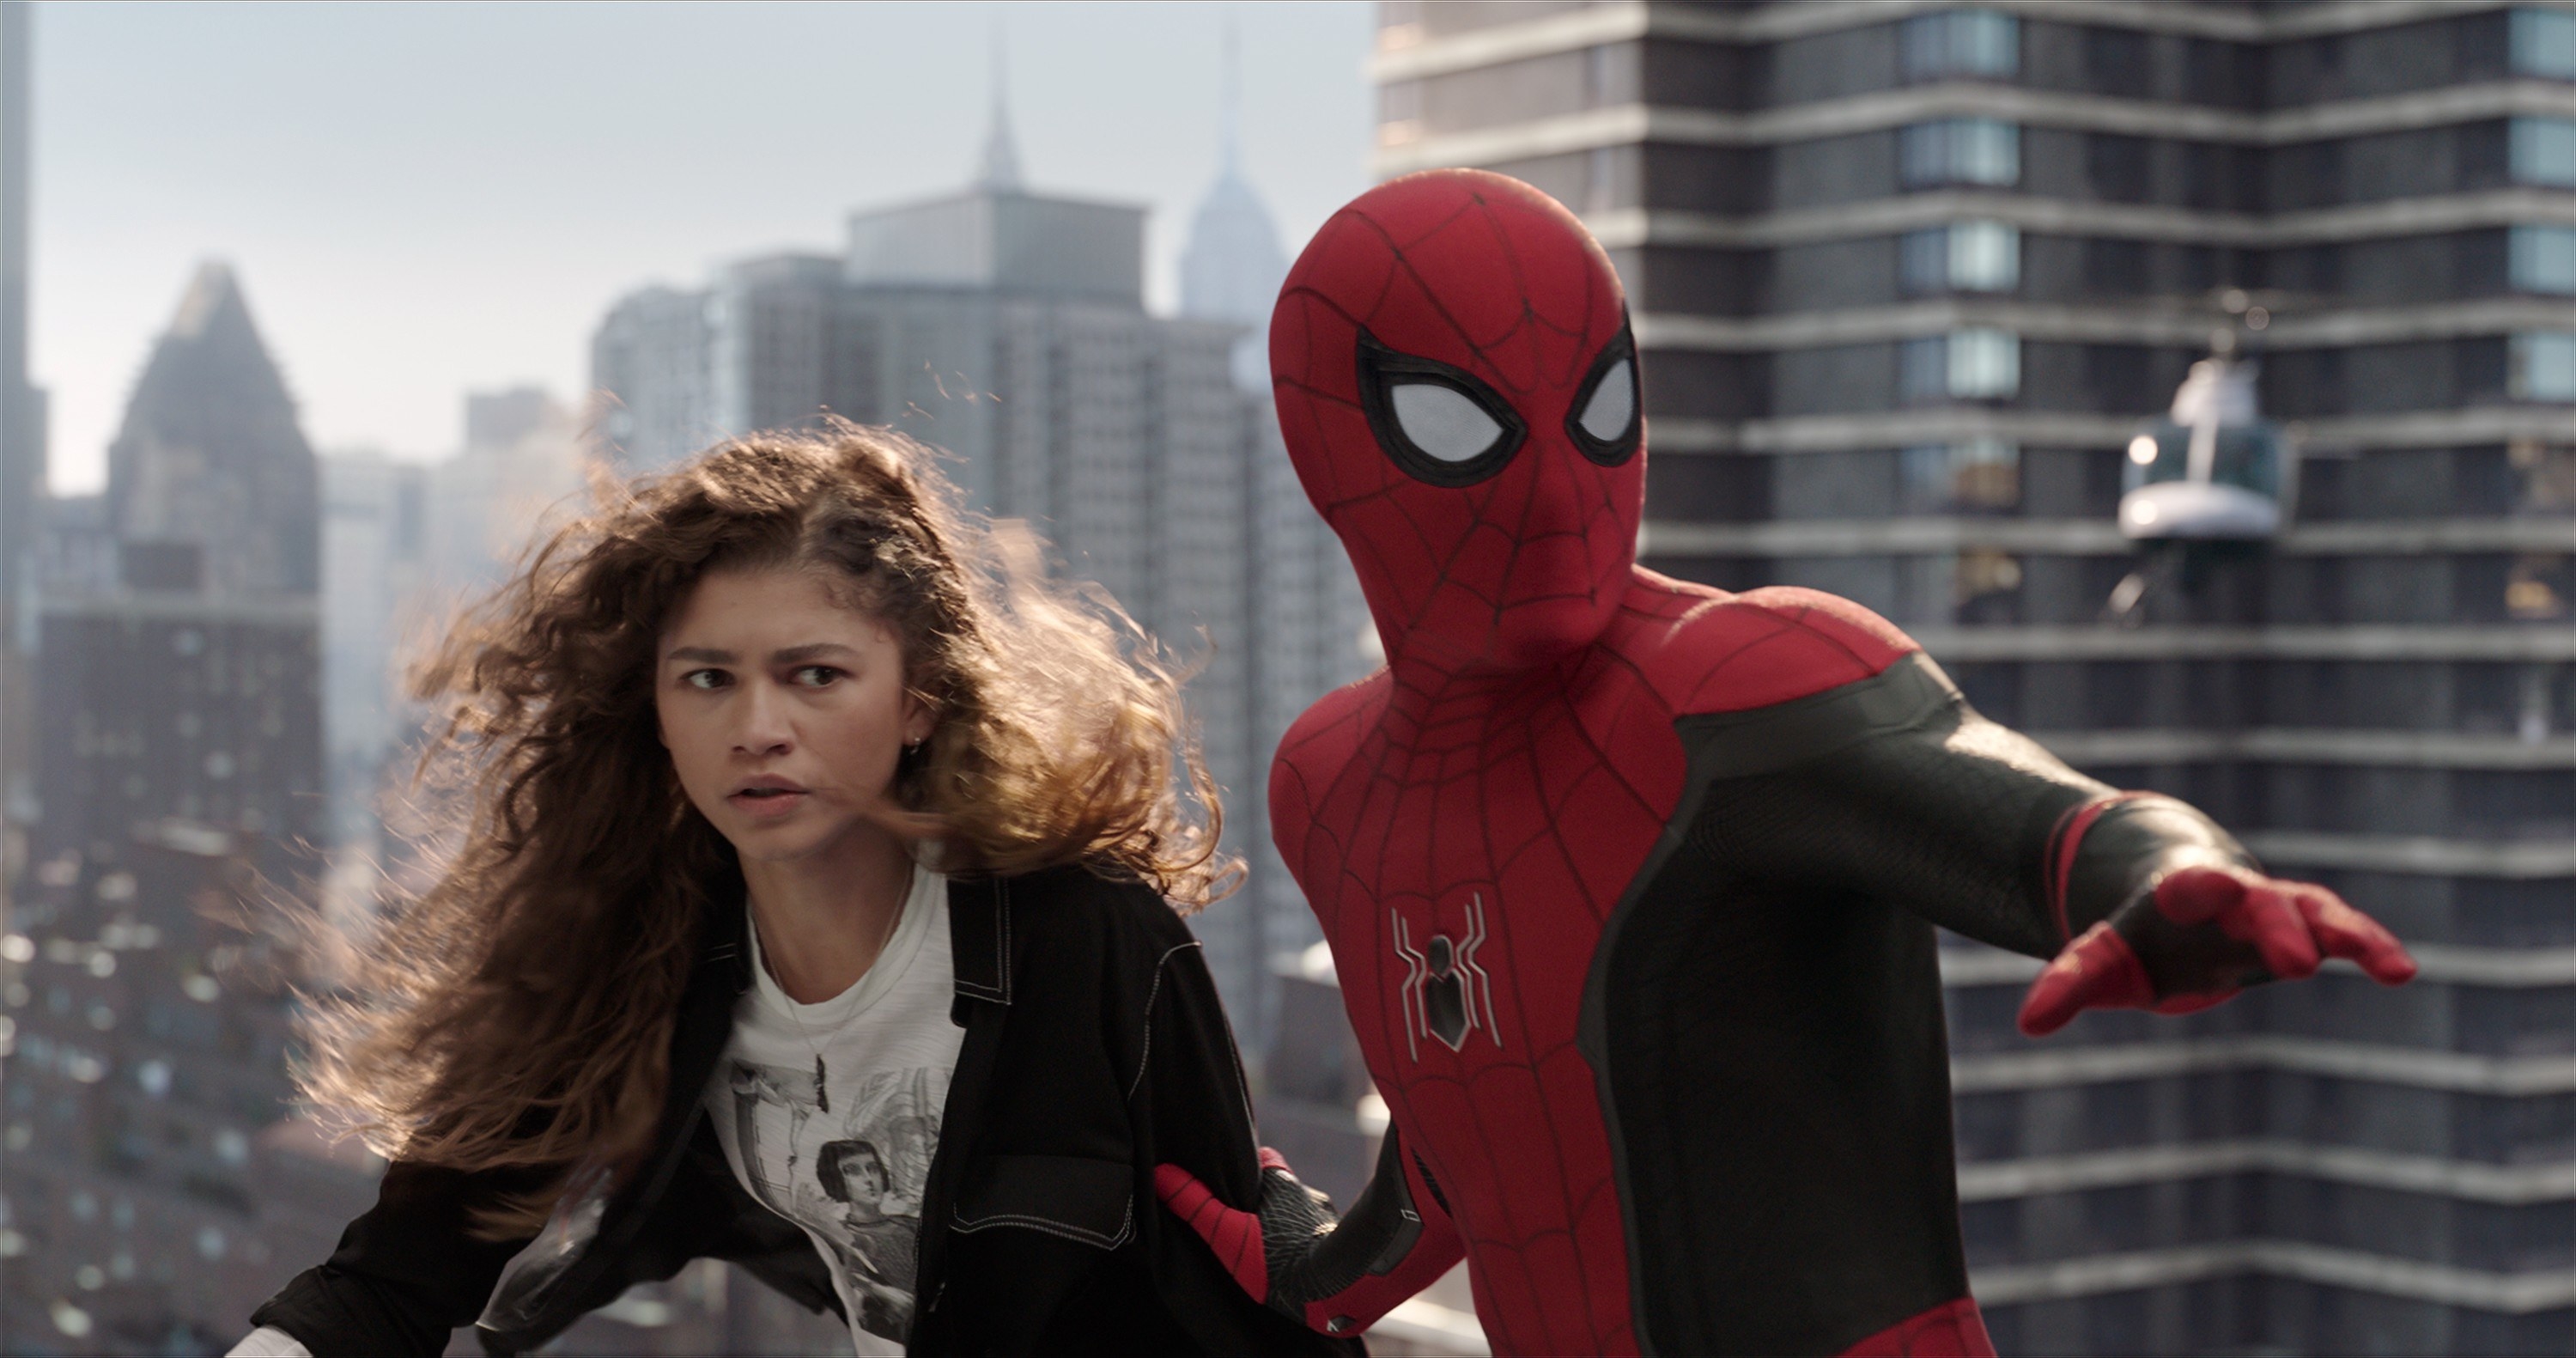 Zendaya and Tom Holland as MJ and Spider-Man standing on a ledge